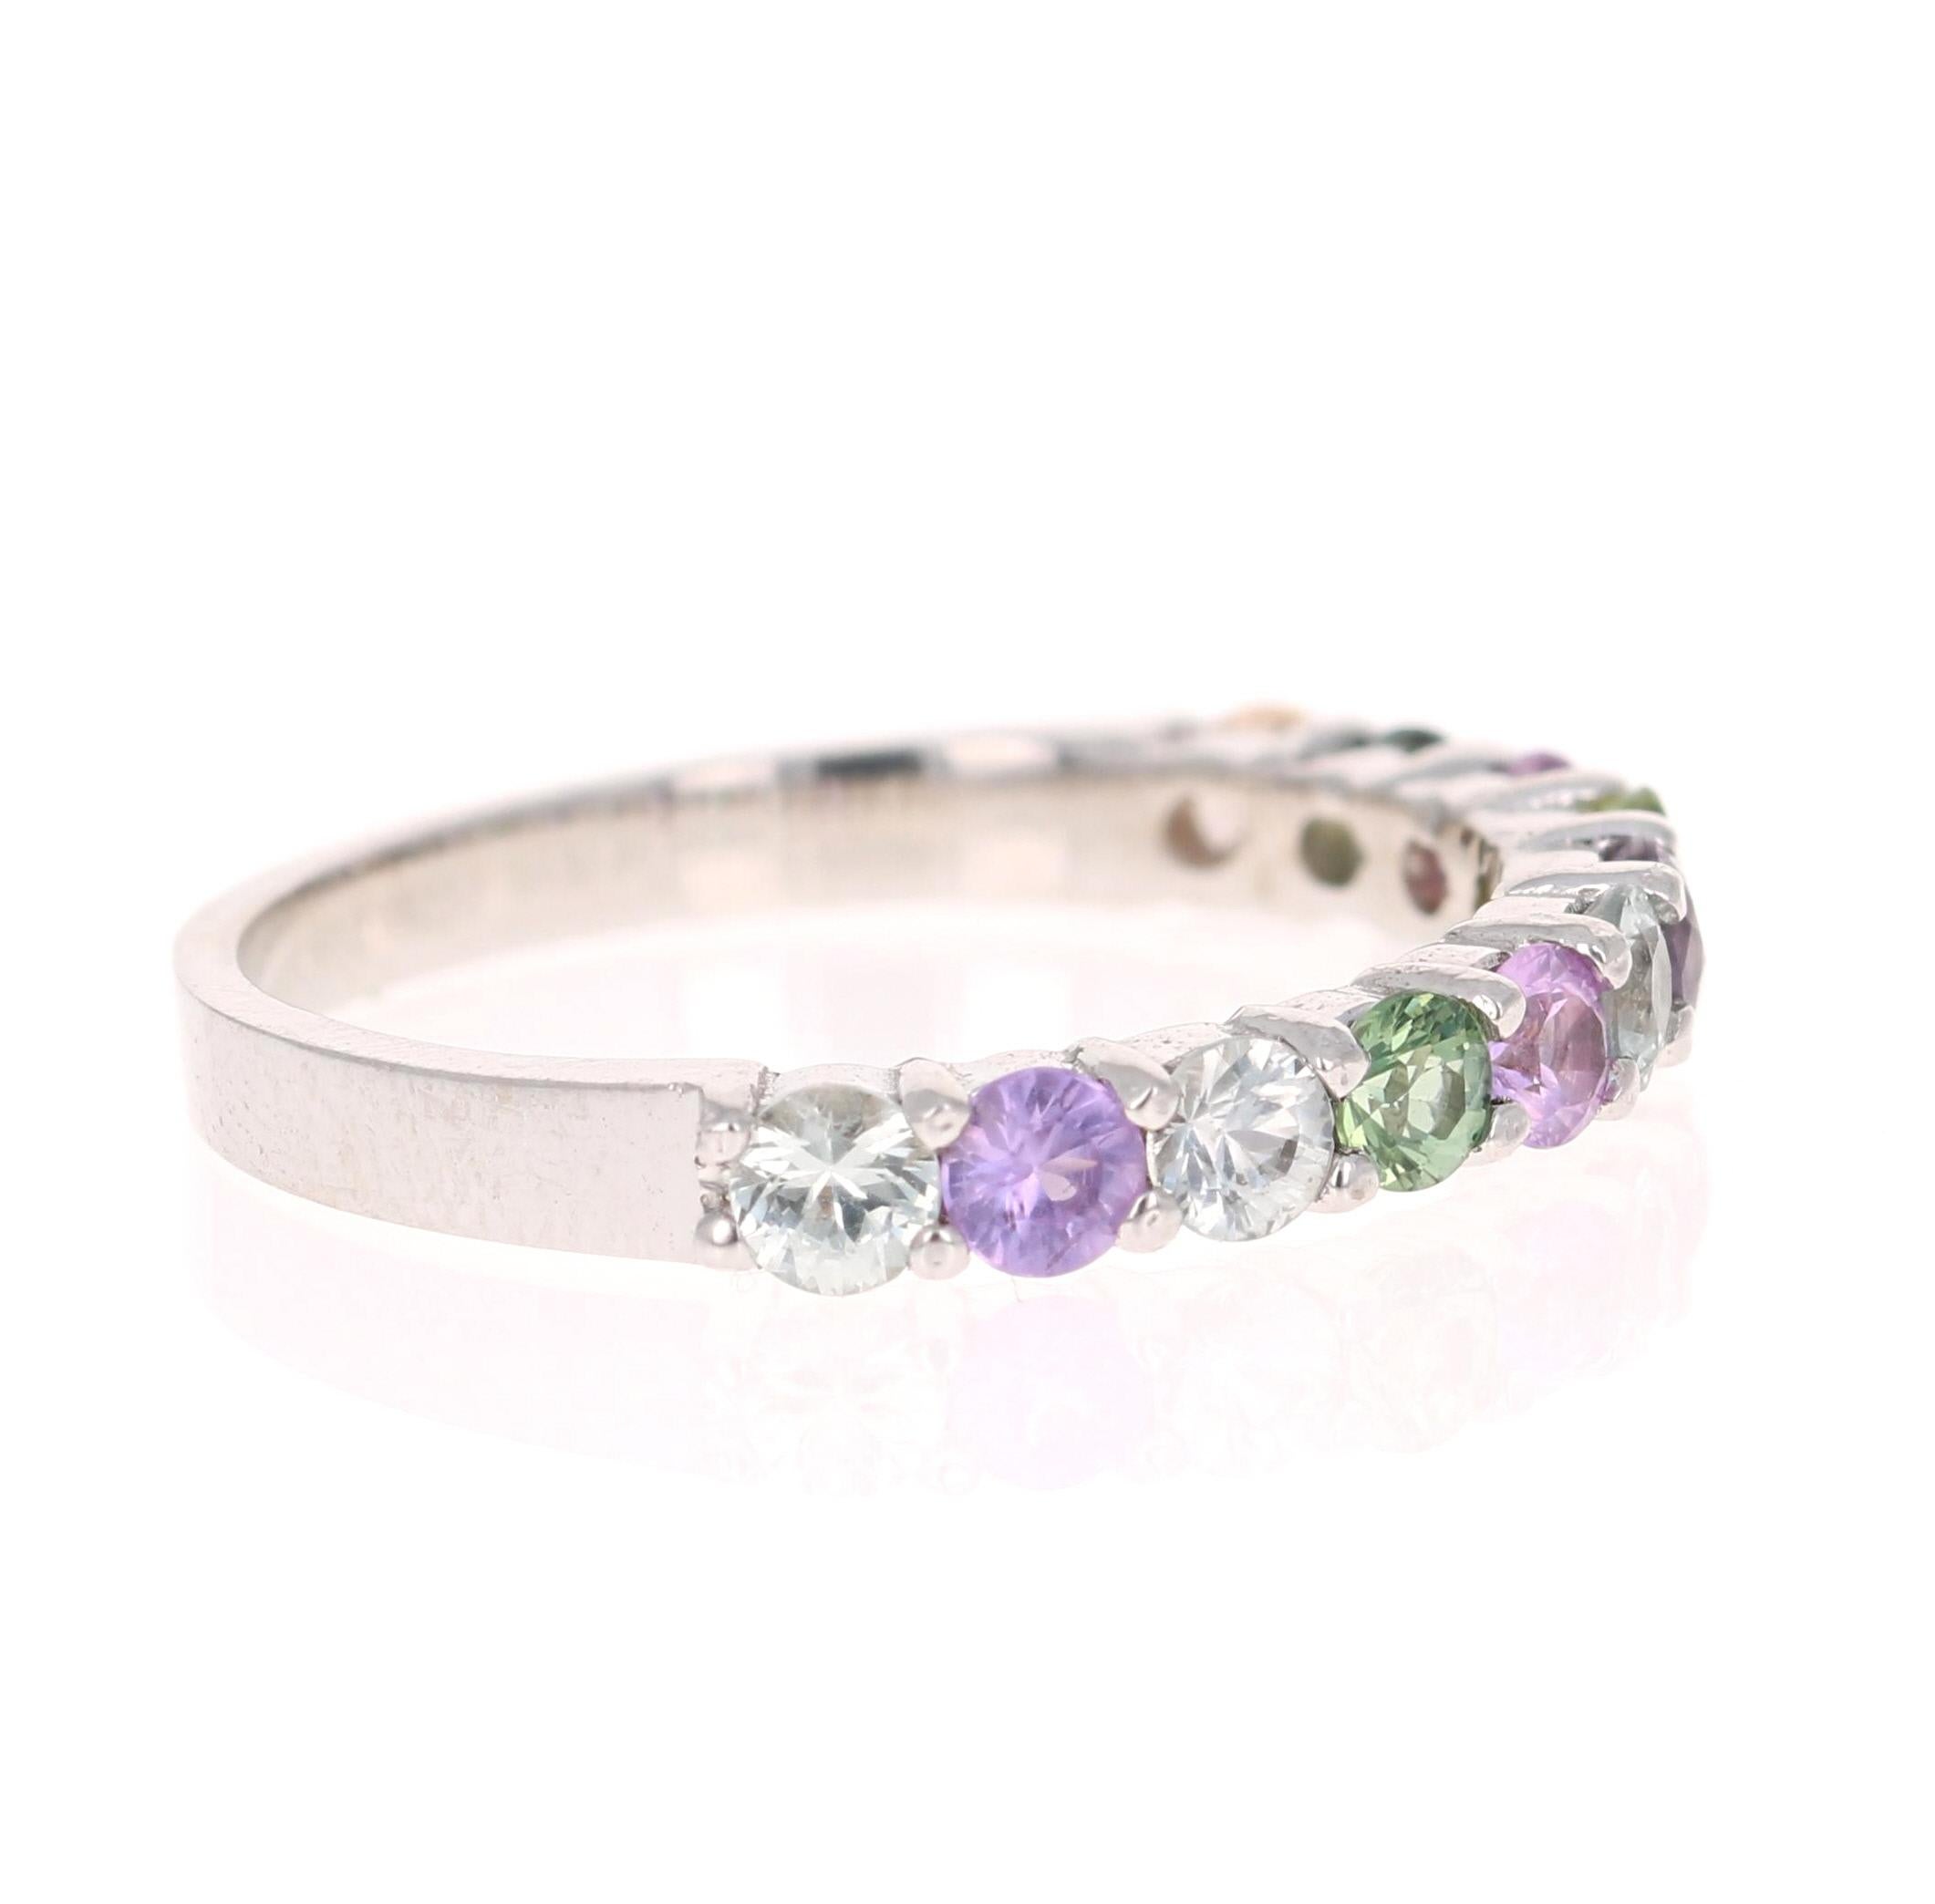 There are 9 Multicolored Natural Sapphires in this band that weigh 1.35 Carats. It is curated in 14 Karat White Gold with an approximate weight of 2.0 grams. 

It is perfect for everyday wear and looks amazing stacked or alone. They are versatile